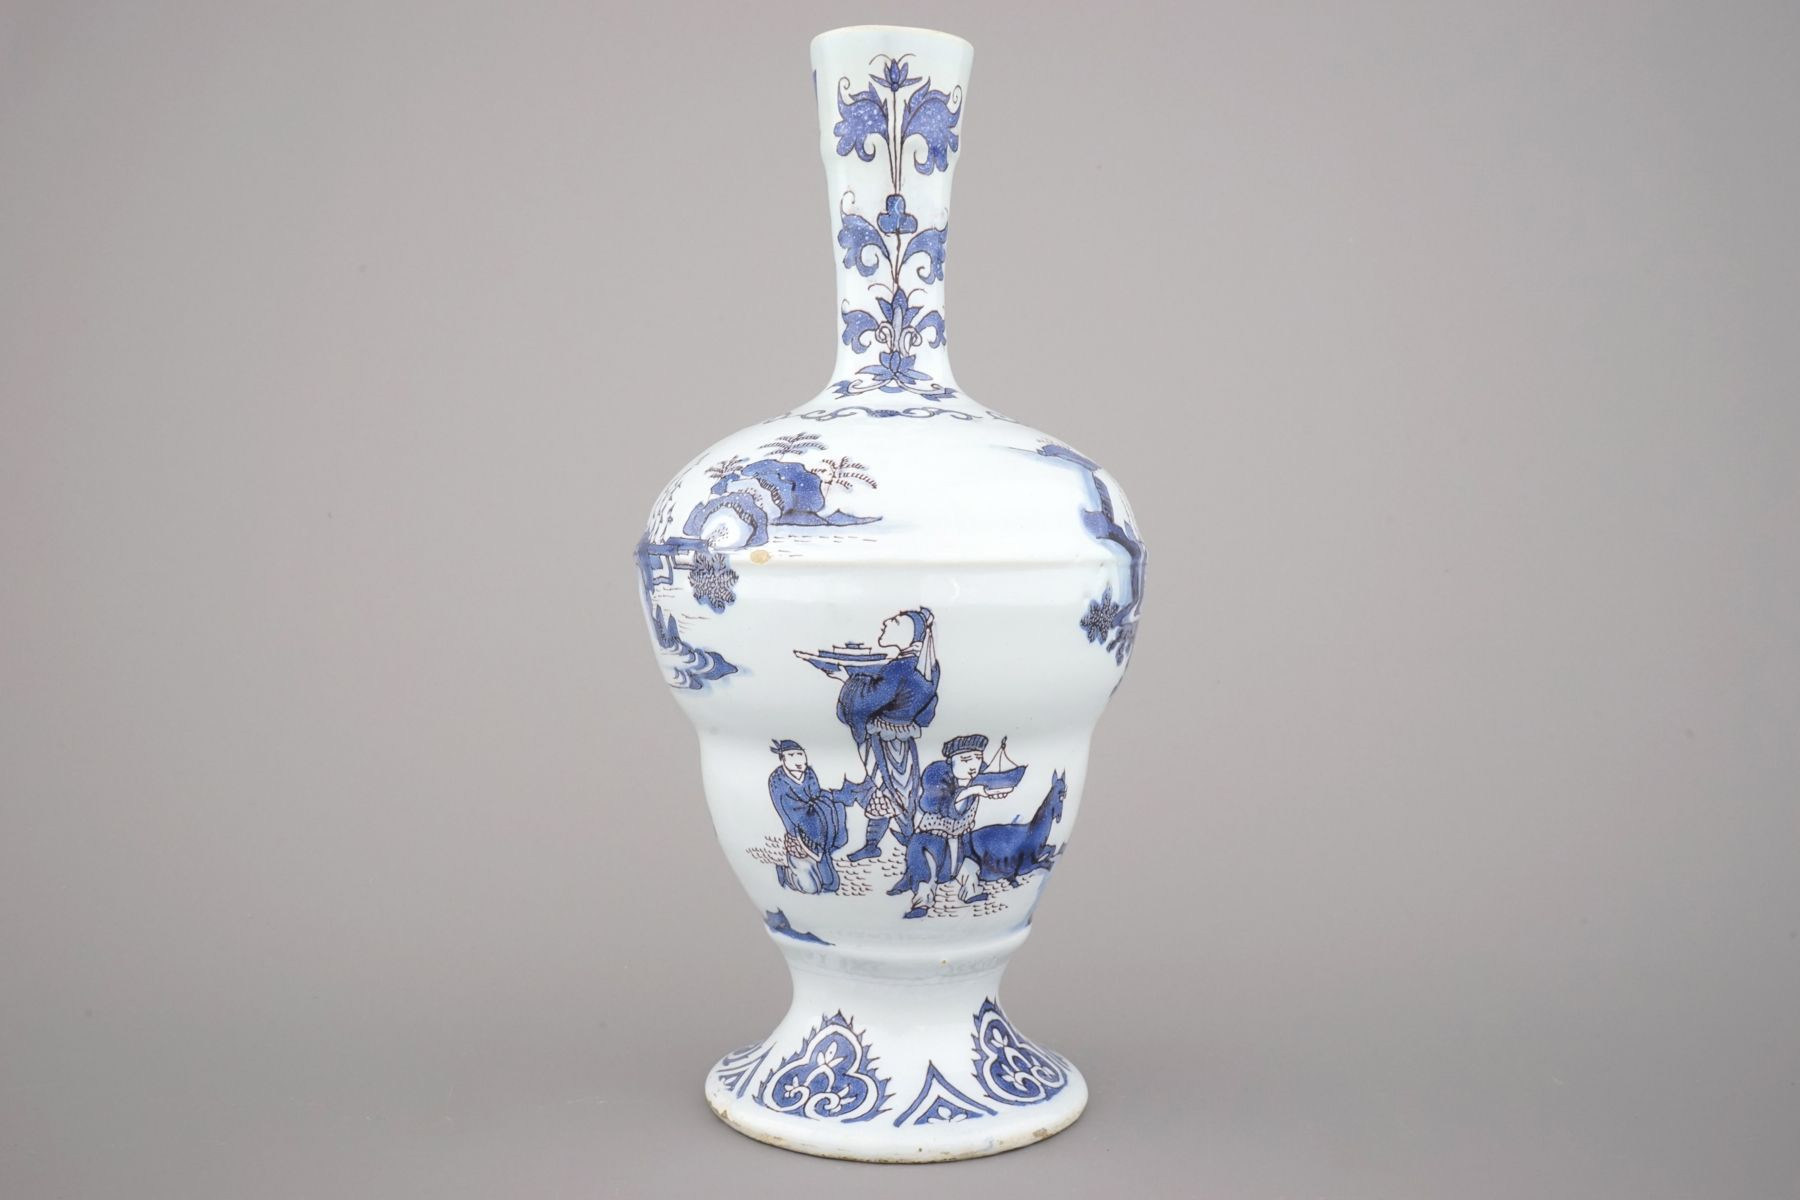 16 attractive Hand Painted Delft Holland Vase 2024 free download hand painted delft holland vase of an unusual dutch delft blue and manganese vase 17th c ceramics i within an unusual dutch delft blue and manganese vase 17th c